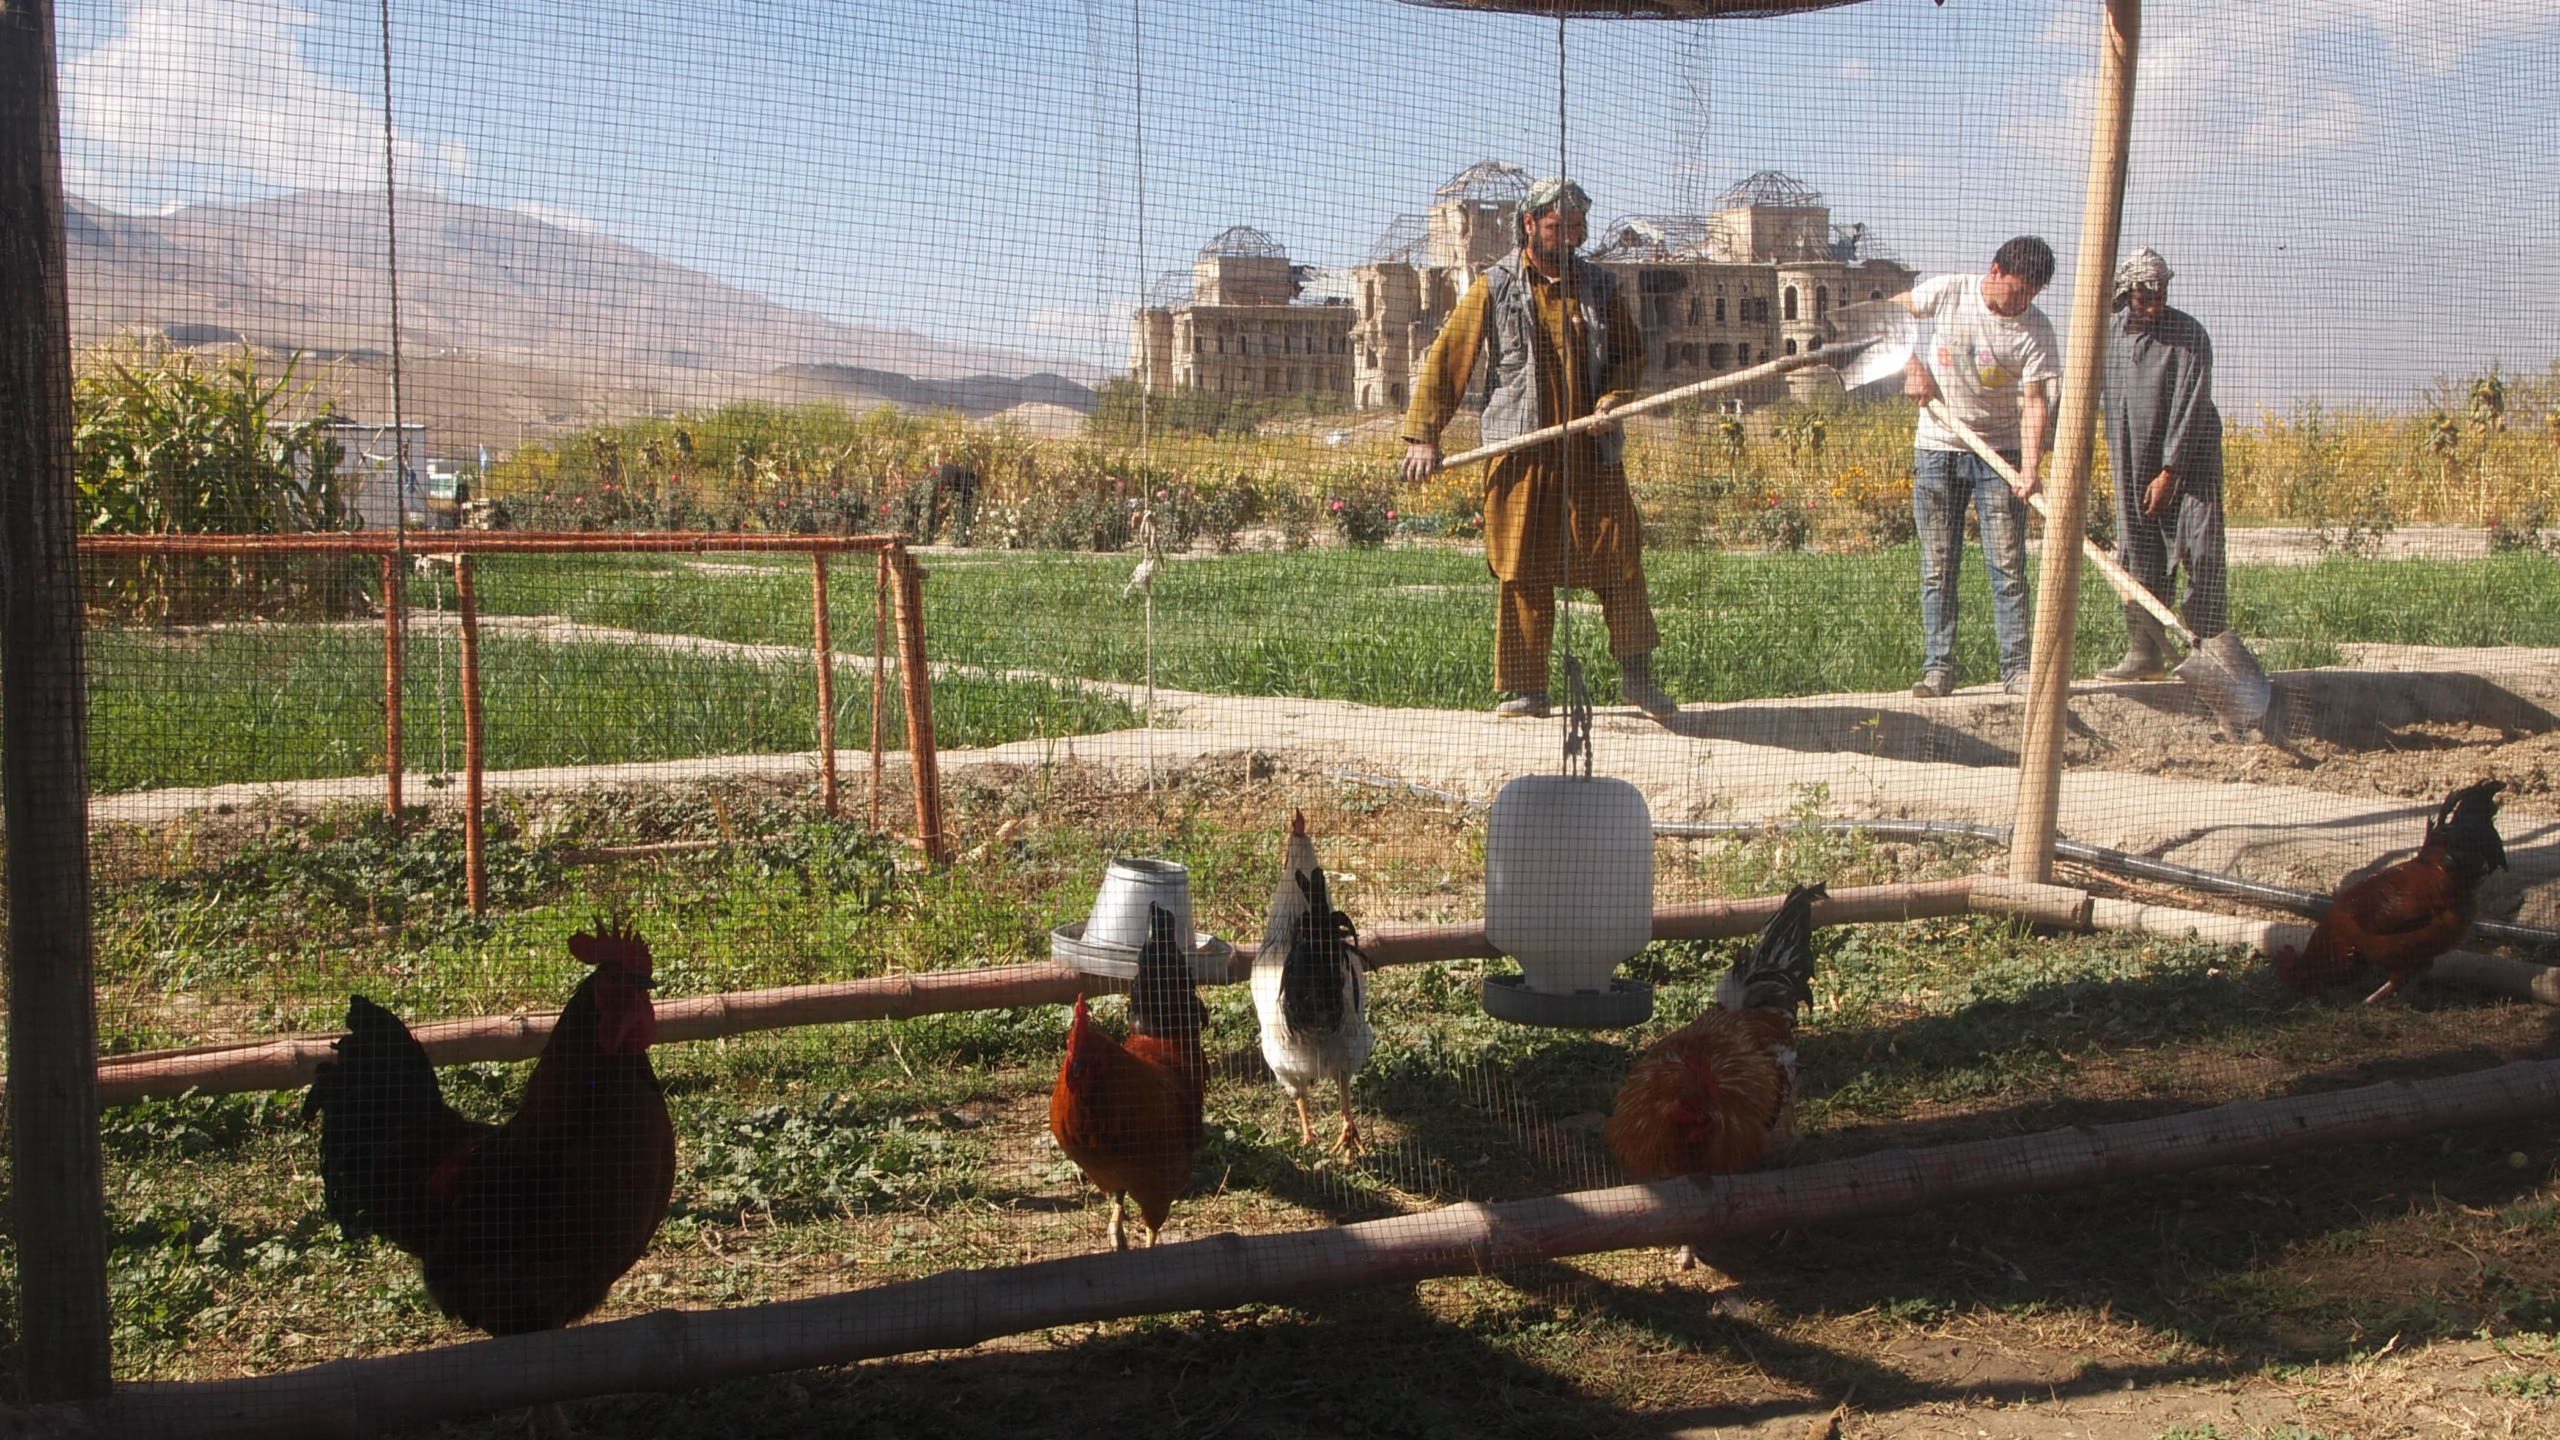 A Wire mesh chicken coop with hanging feeders and water in the foreground, people shoveling in the background.